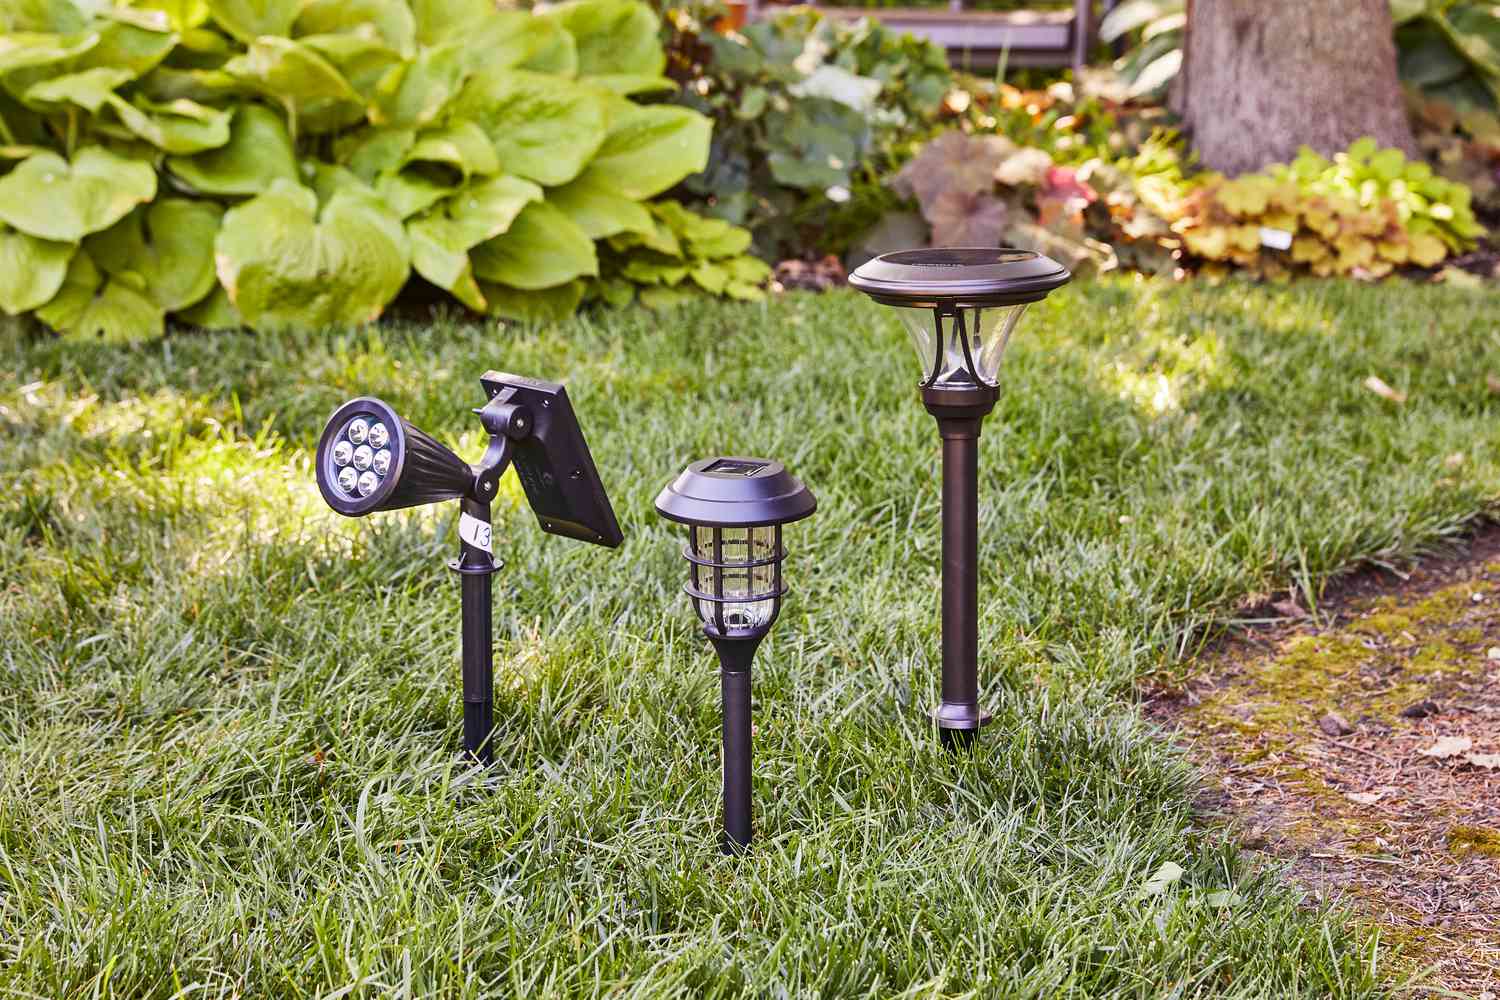 Glowing Green: Illuminating Your Life with the Latest Solar-Powered Lighting Gadgets